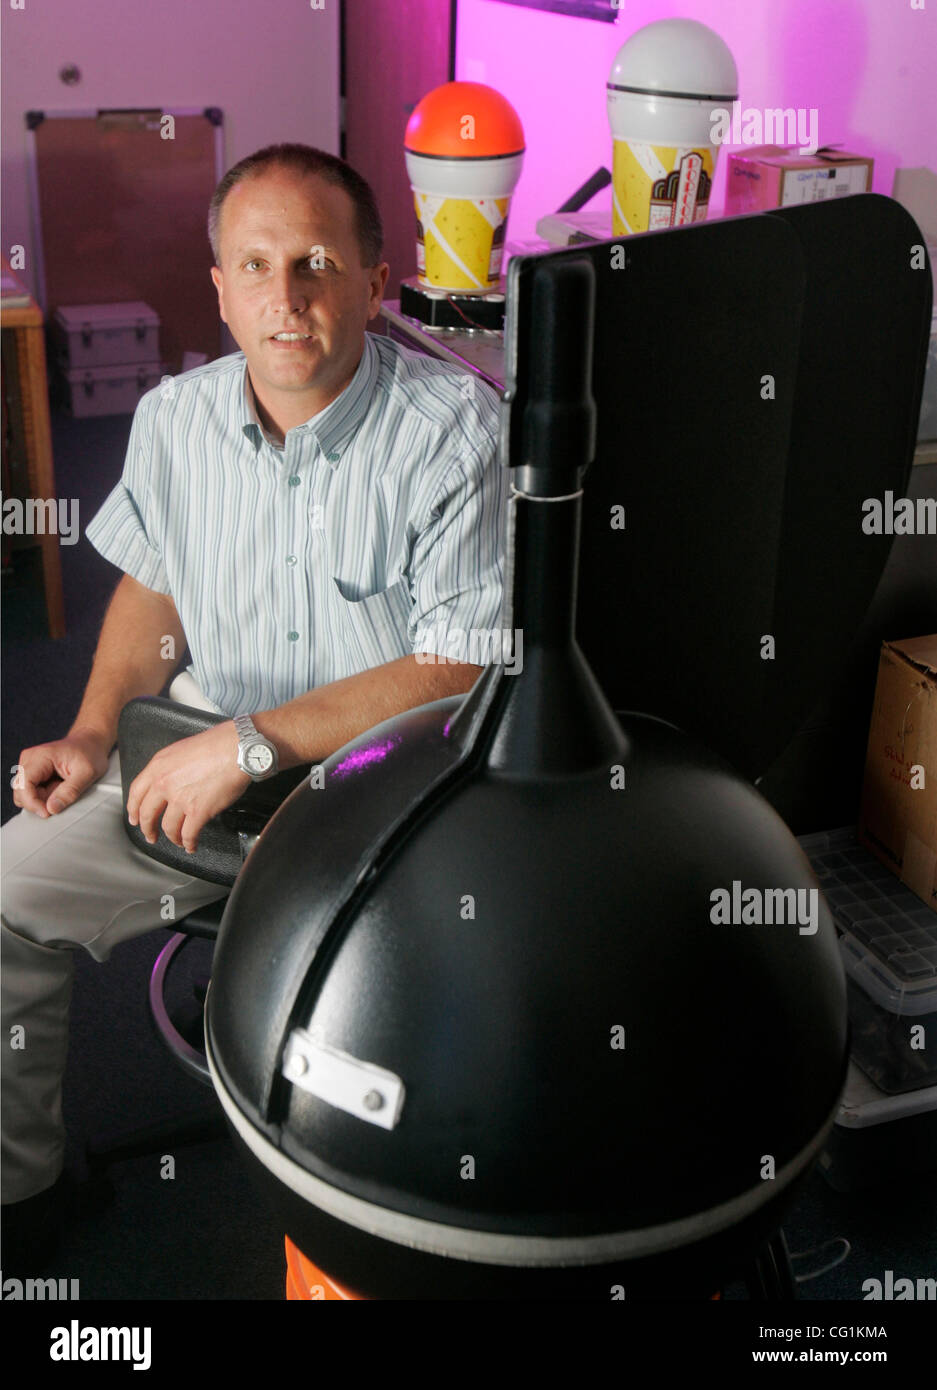 Aug 21, 2007, Oceanside, California, USA At left, ANDY SYBRANDY is the president  of Pacific Gyre.  At right is a 'surface sphere' which houses electronics, batteries, sensors and a transmitter.  These buoys have been deployed in the path of Hurricane Dean. The buoys gather data about ocean temperat Stock Photo